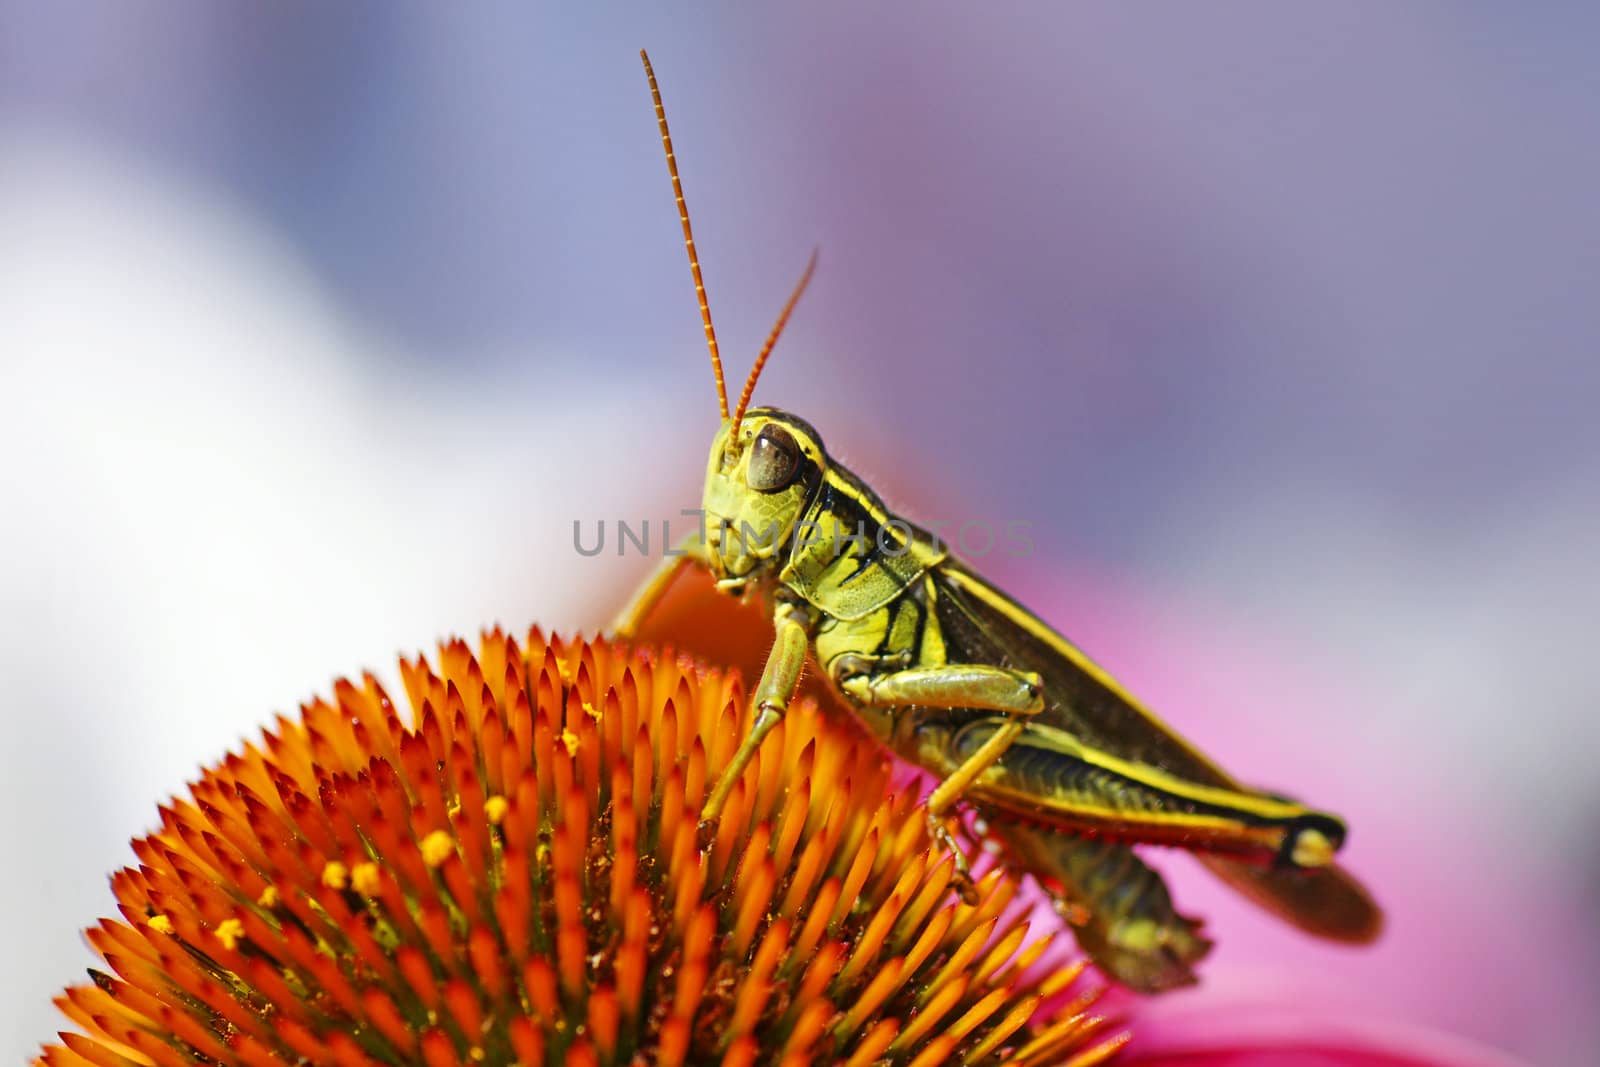 Cute red-legged grasshopper resting on top of a cone flower, beautiful shades of pink, purple, orange and green, great nature or insect wallpaper.